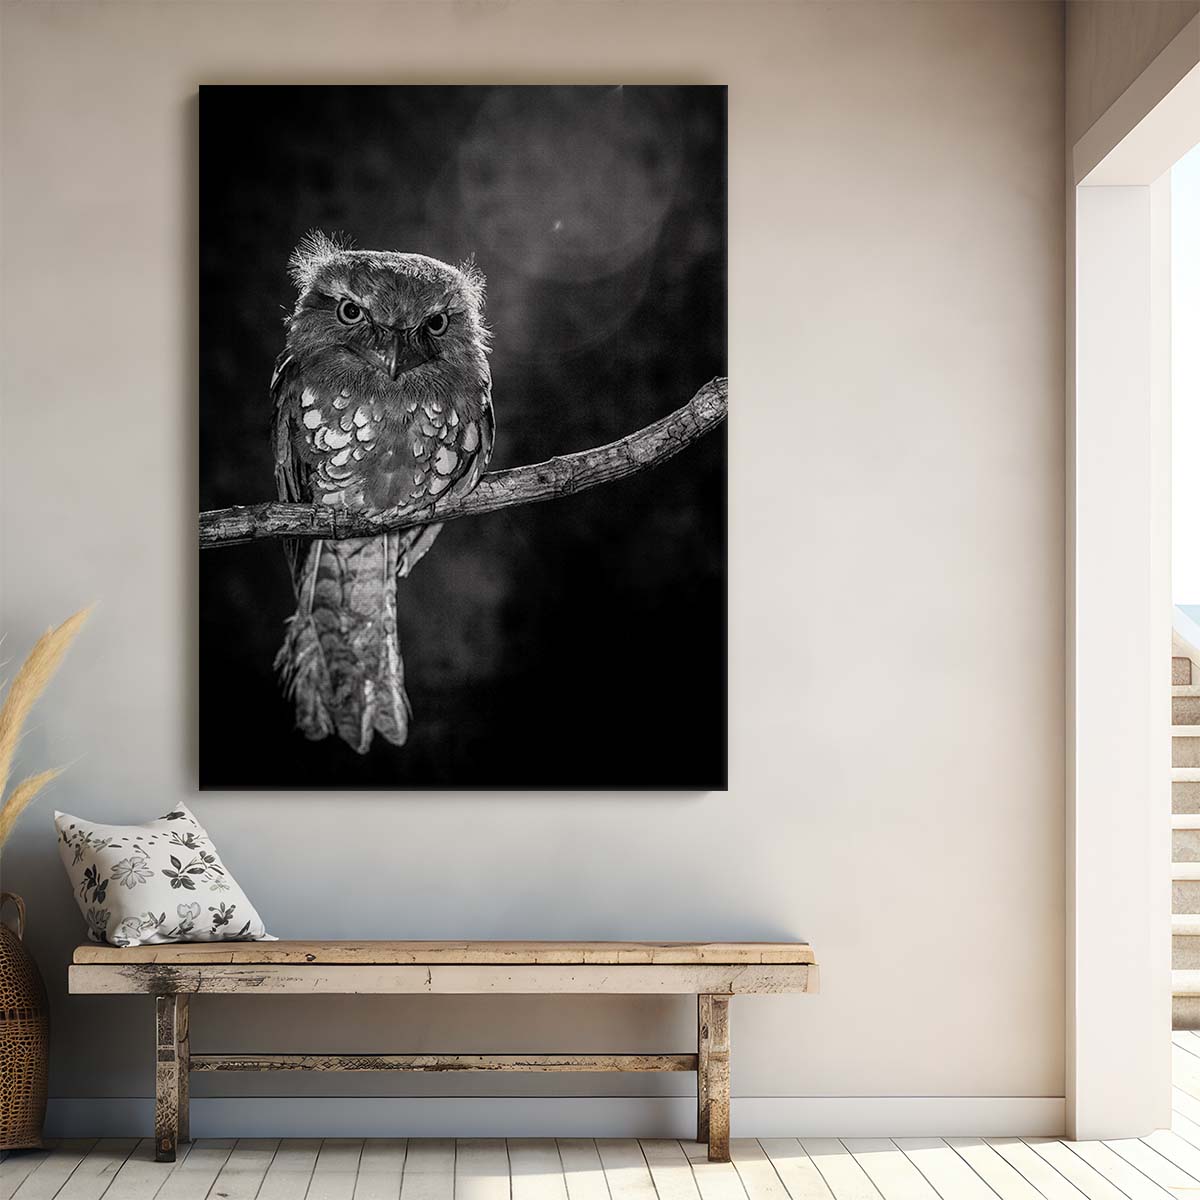 Monochrome Night Owl Photography Cute Baby Wildlife on Branch by Luxuriance Designs, made in USA